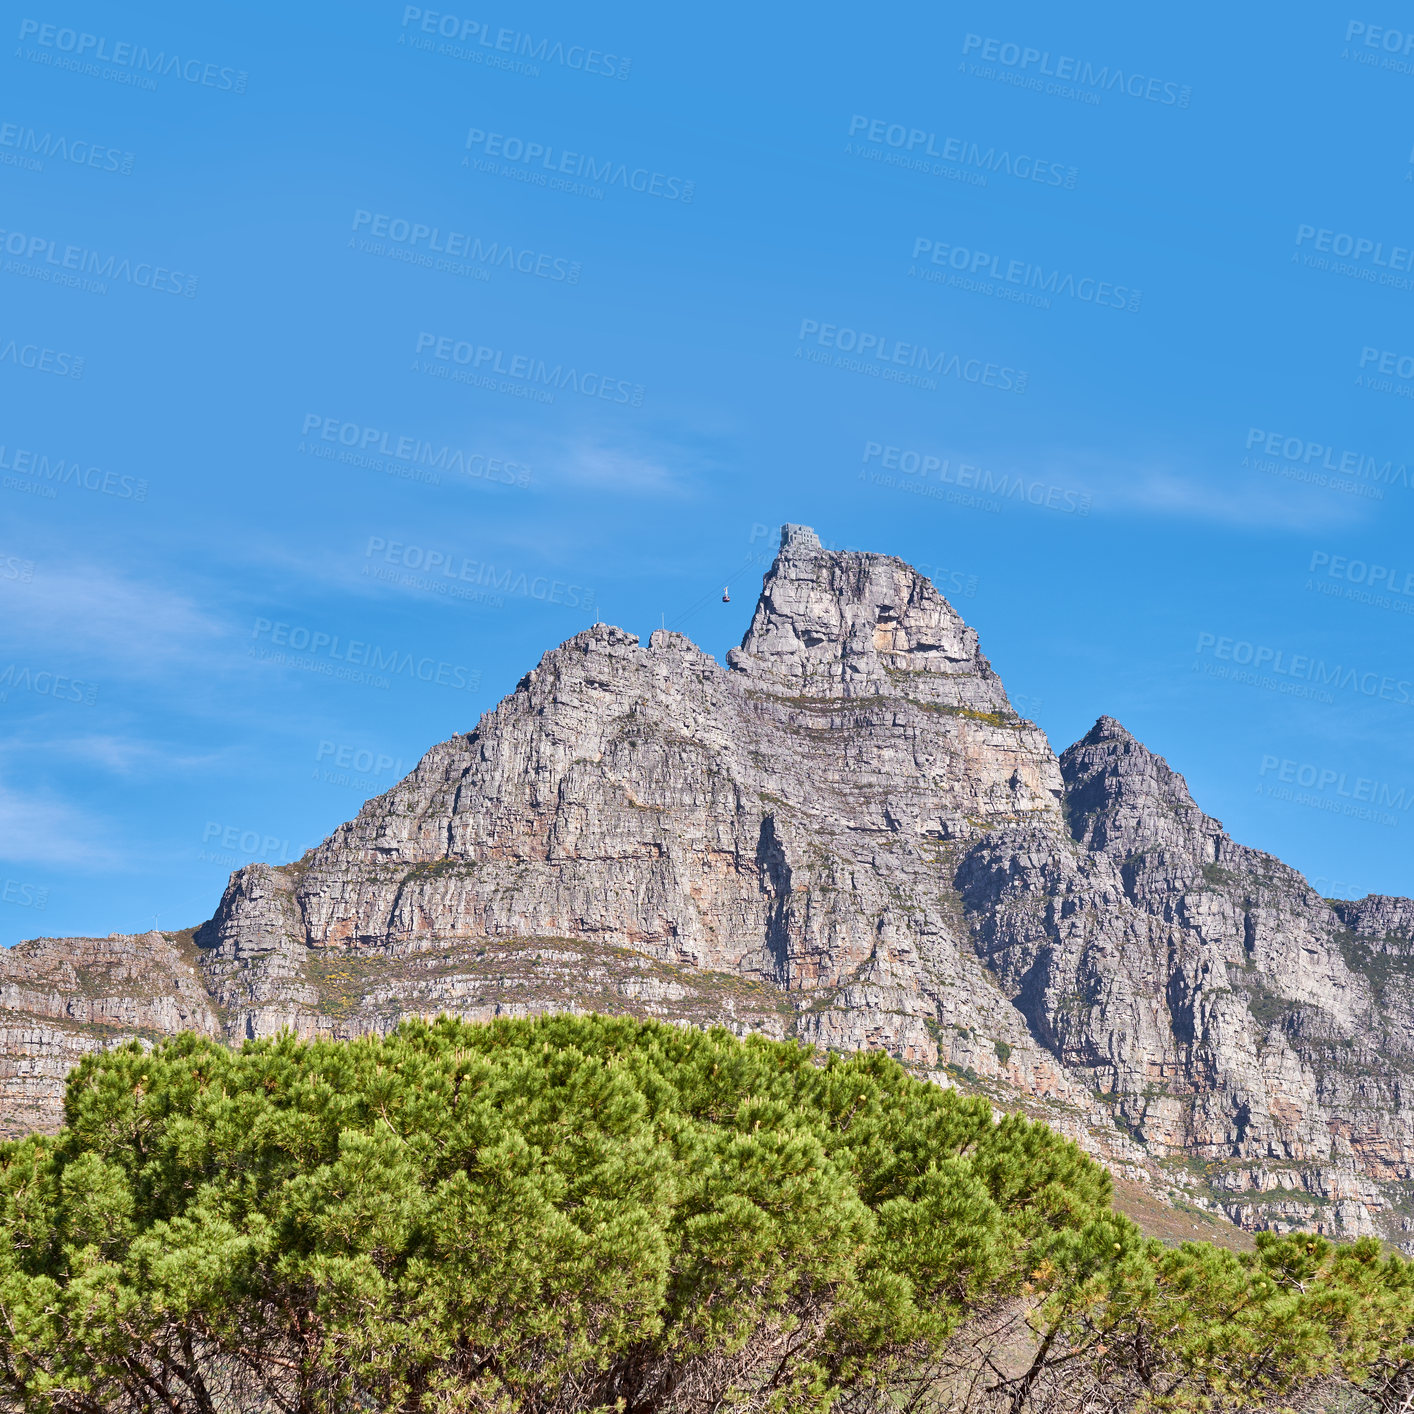 Buy stock photo Landscape view and blue sky with copy space of Table Mountain in Western Cape, South Africa. Steep scenic famous hiking and trekking terrain with trees growing around in. Cable car transport to peak